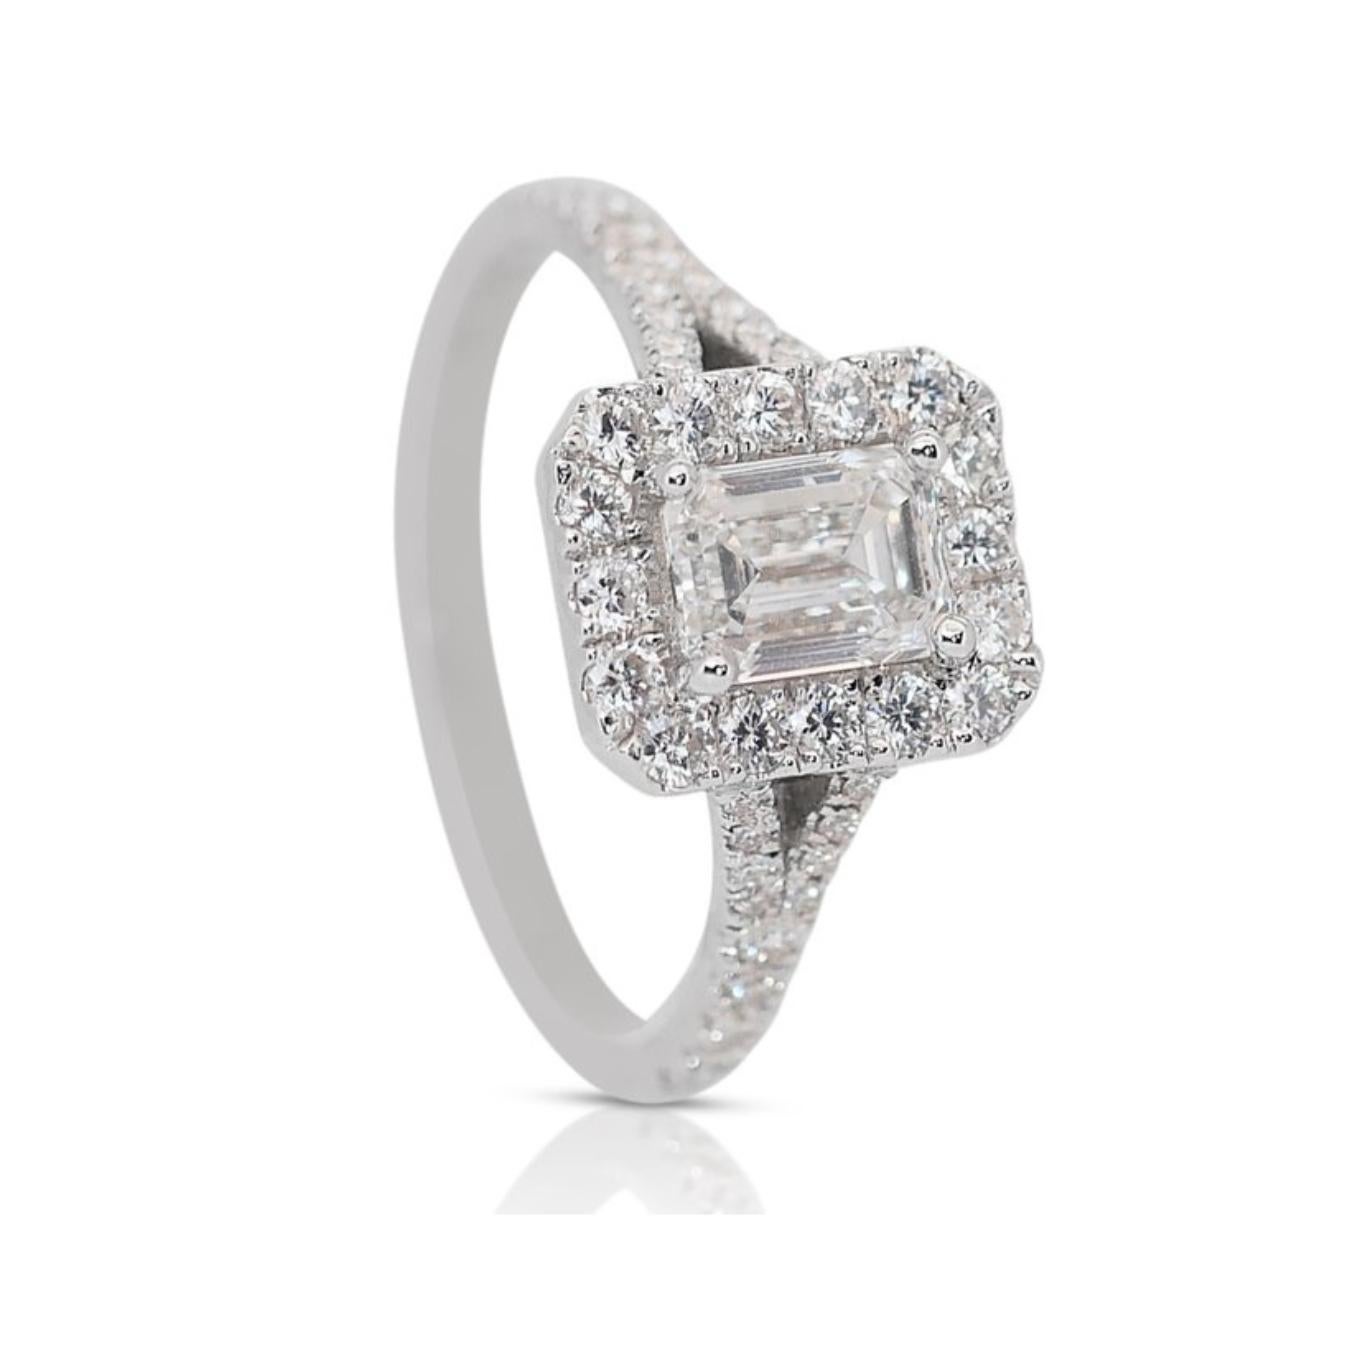 Exquisite 18k White Gold Natural Diamond Halo Ring w/1.30 ct - GIA Certified

Unveil timeless elegance with this exquisite 18k white gold diamond halo ring. A captivating 0.90 carat emerald-cut diamond, is the centerpiece and a dazzling halo of 42